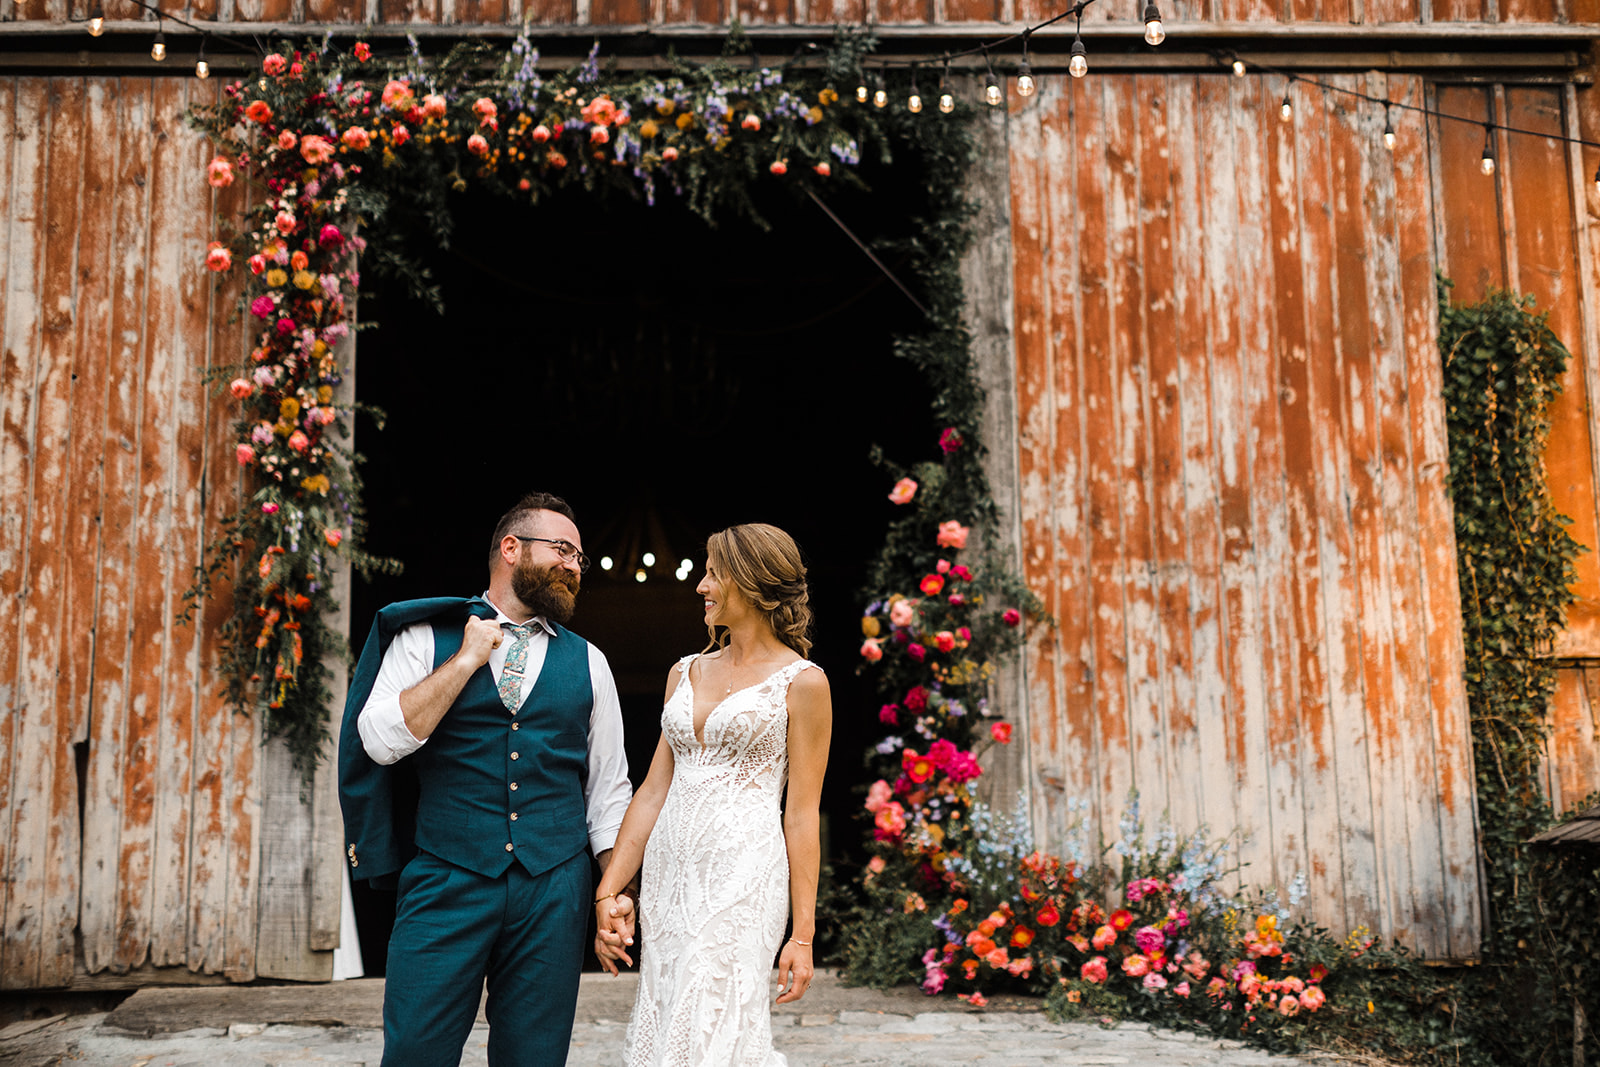 Colorful Barn Wedding in Chester County, PA